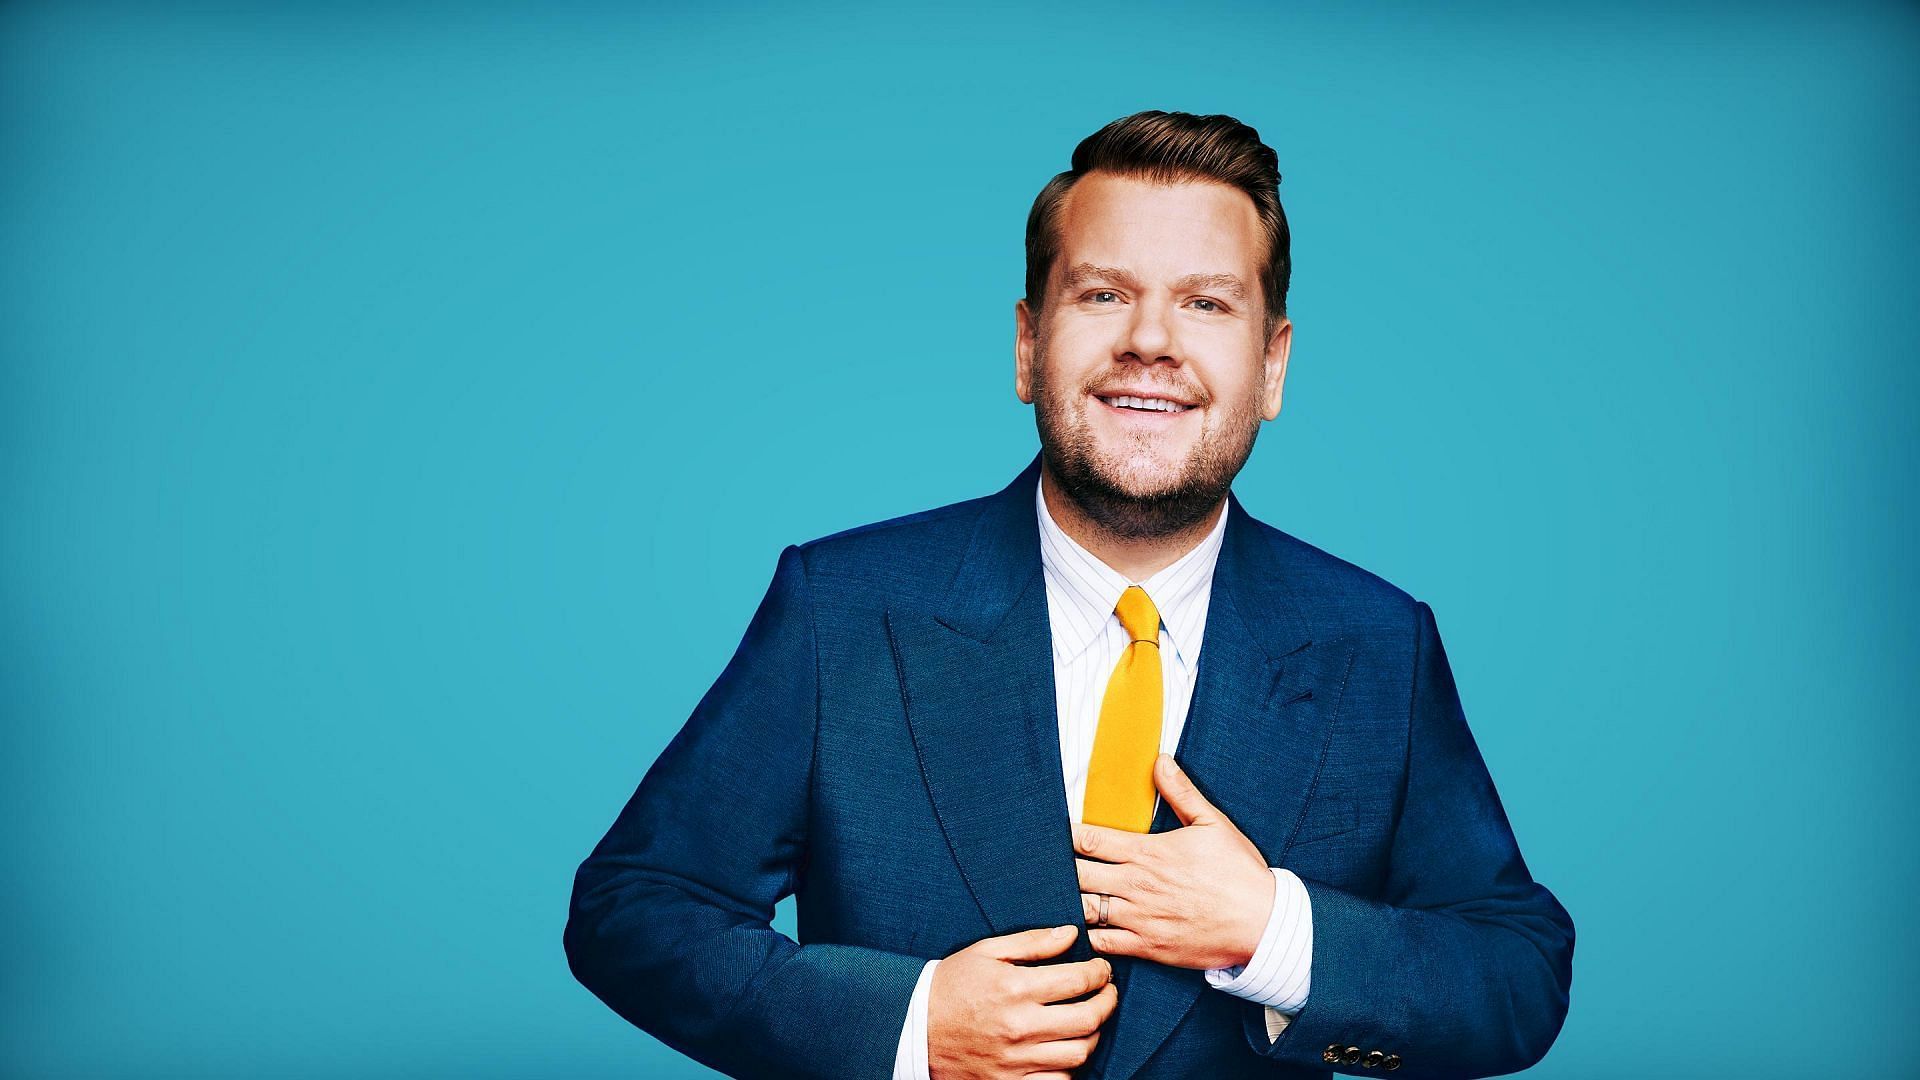 Social media users have launched an official petition against casting James Corden in &#039;Wicked&#039;  (Image via CBS/The Late Late Show With James Corden)